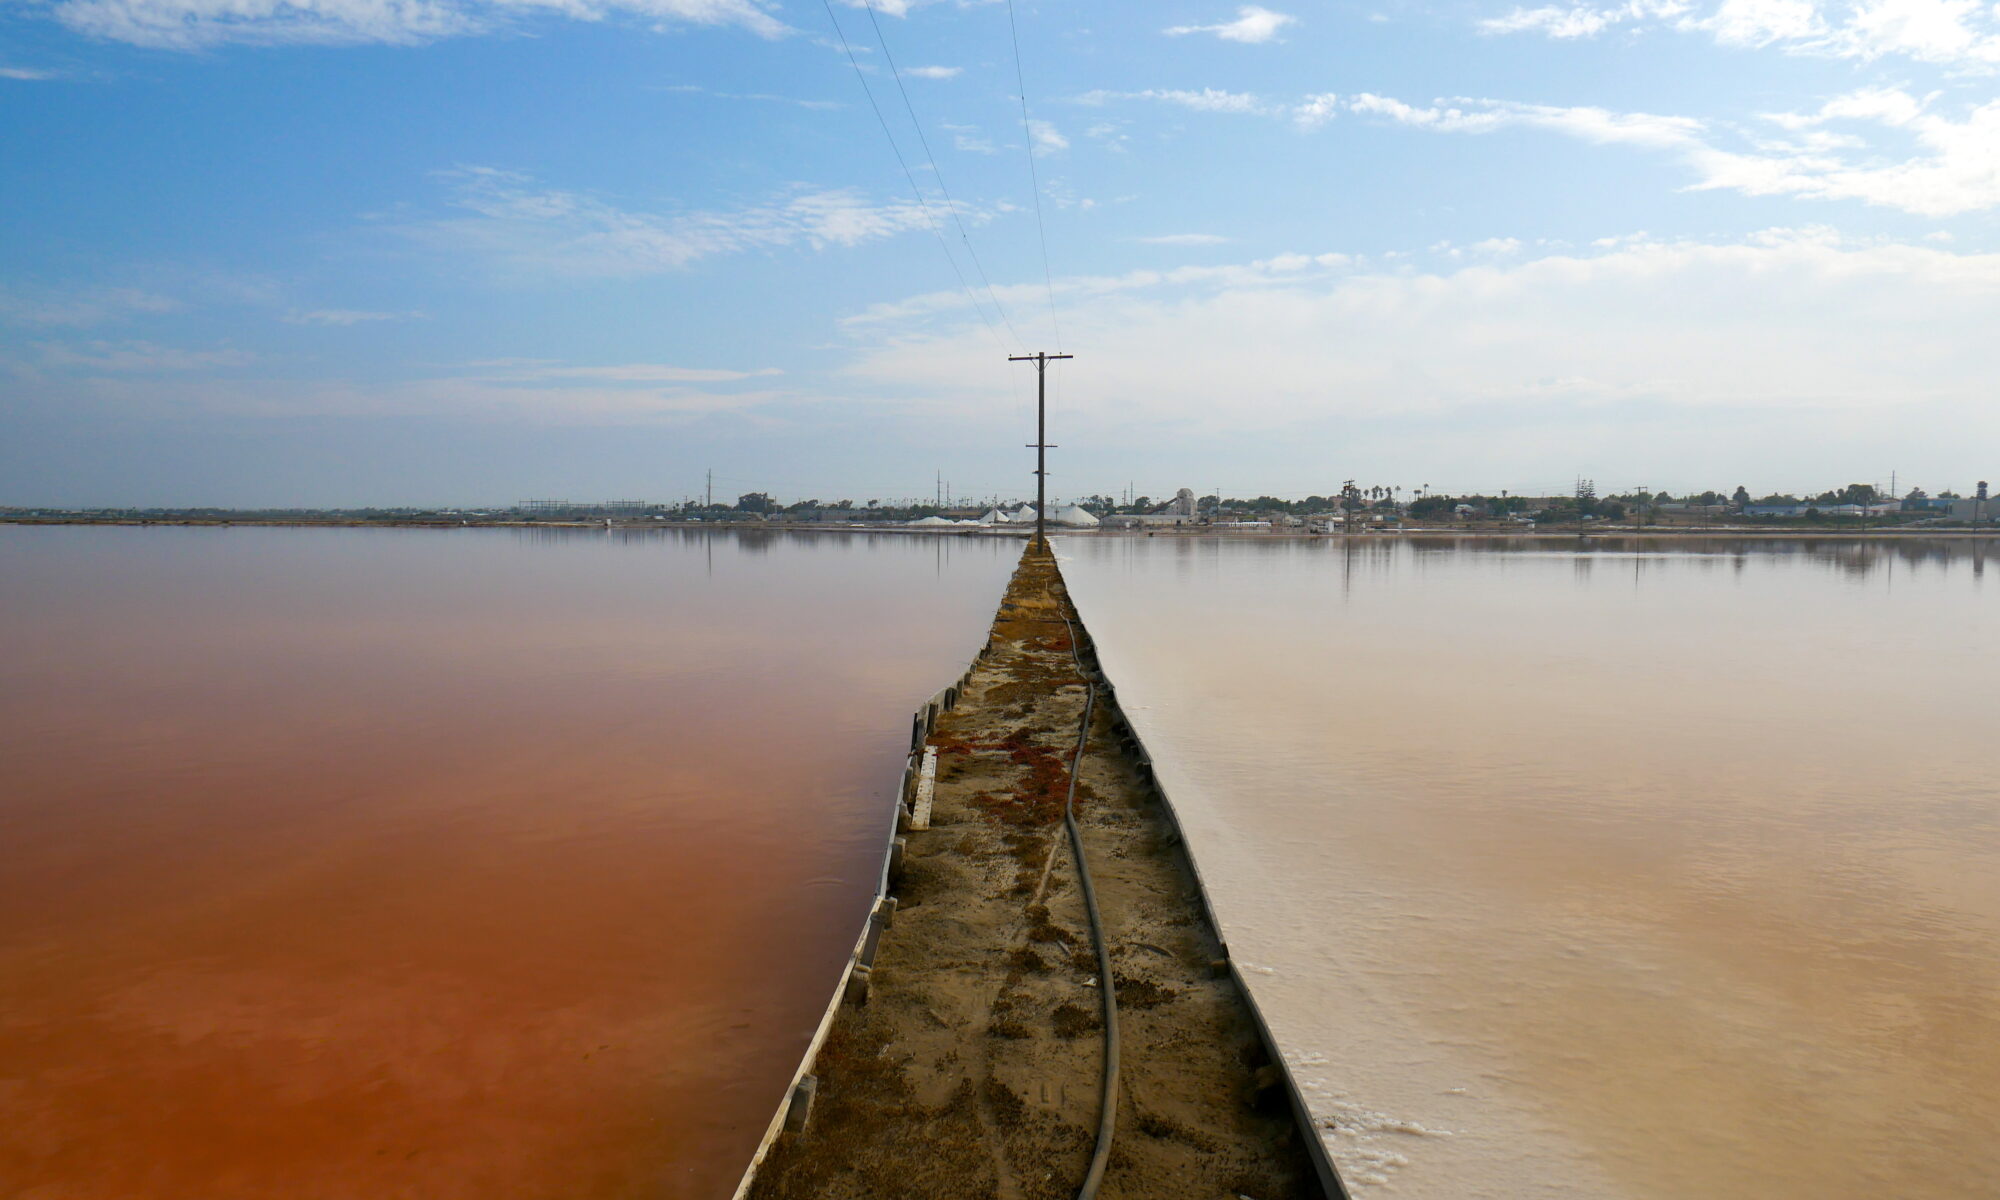 A dirt path separates two salt ponds on either side. On the left, a deep pink-red pond with still water, and on the right, a white-pink lake with still water.